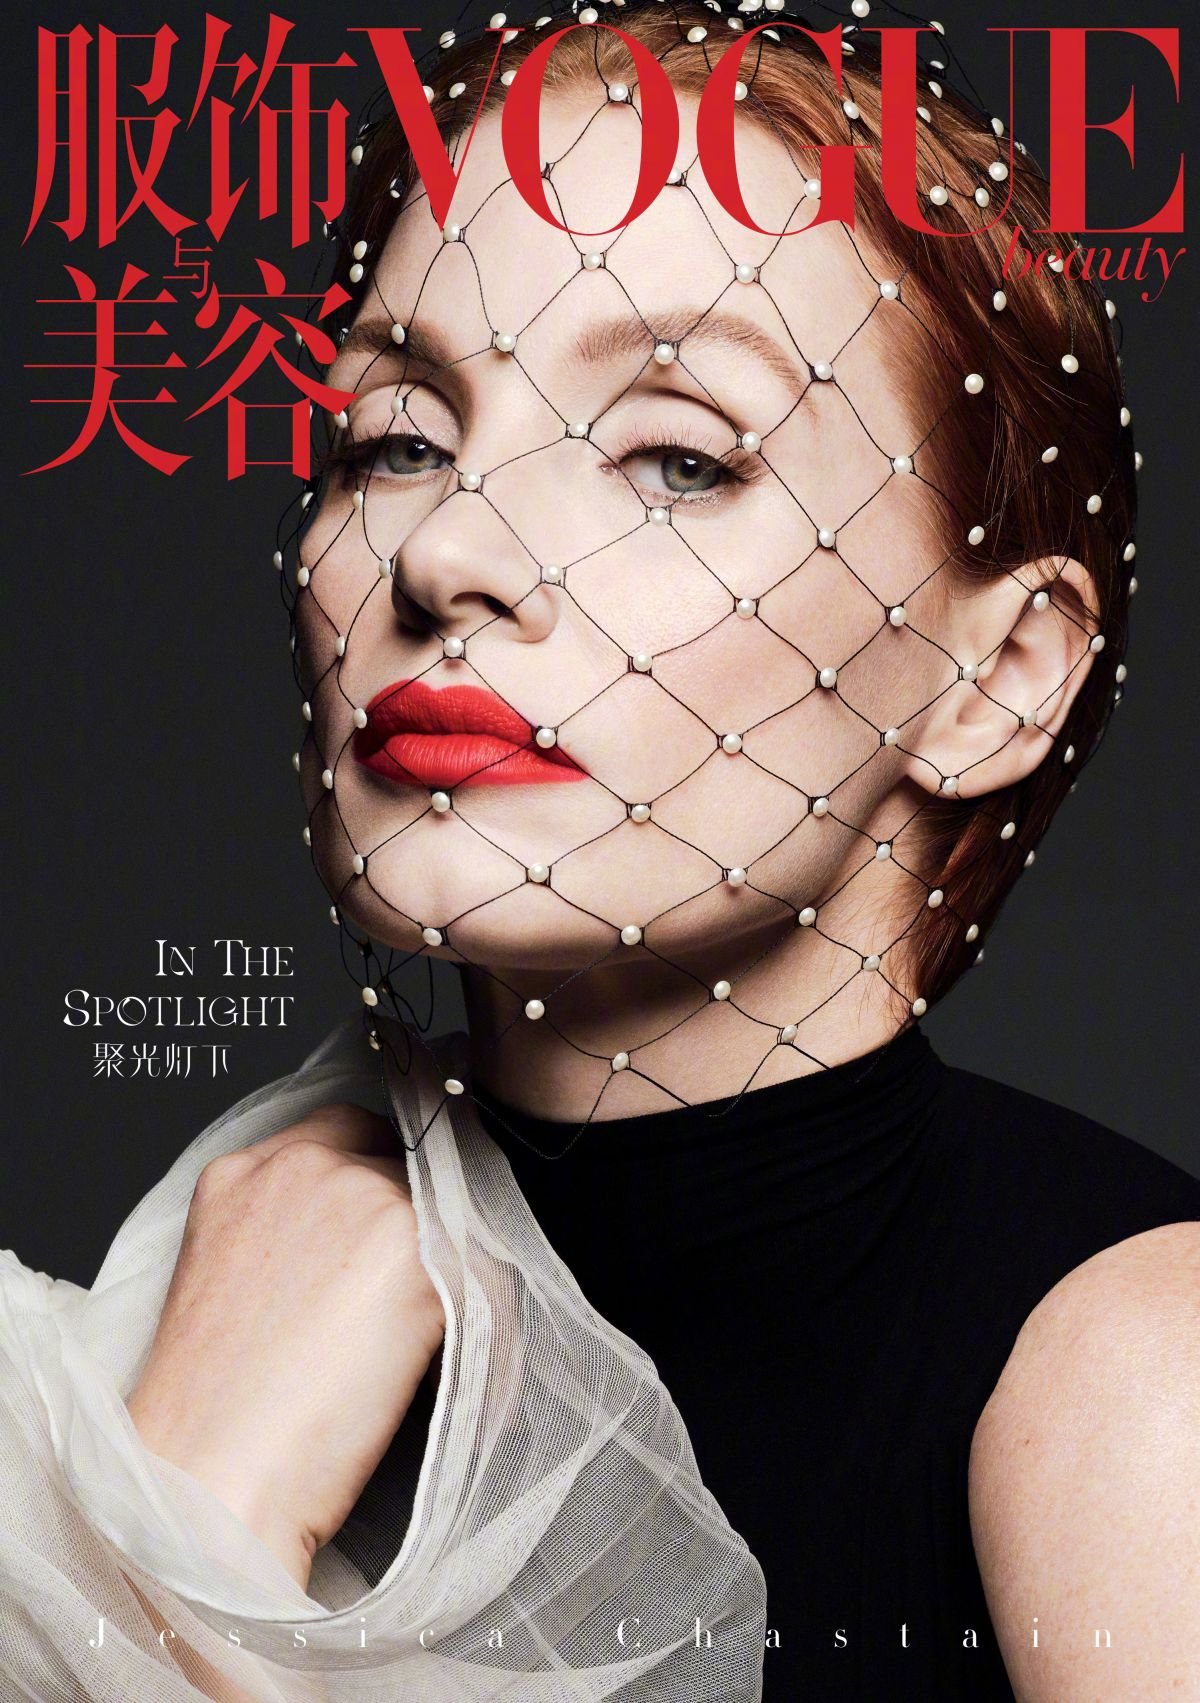 Jessica-Chastain-by-Ben-Hassett-for-Vogue-China-December-2021 (1).jpg